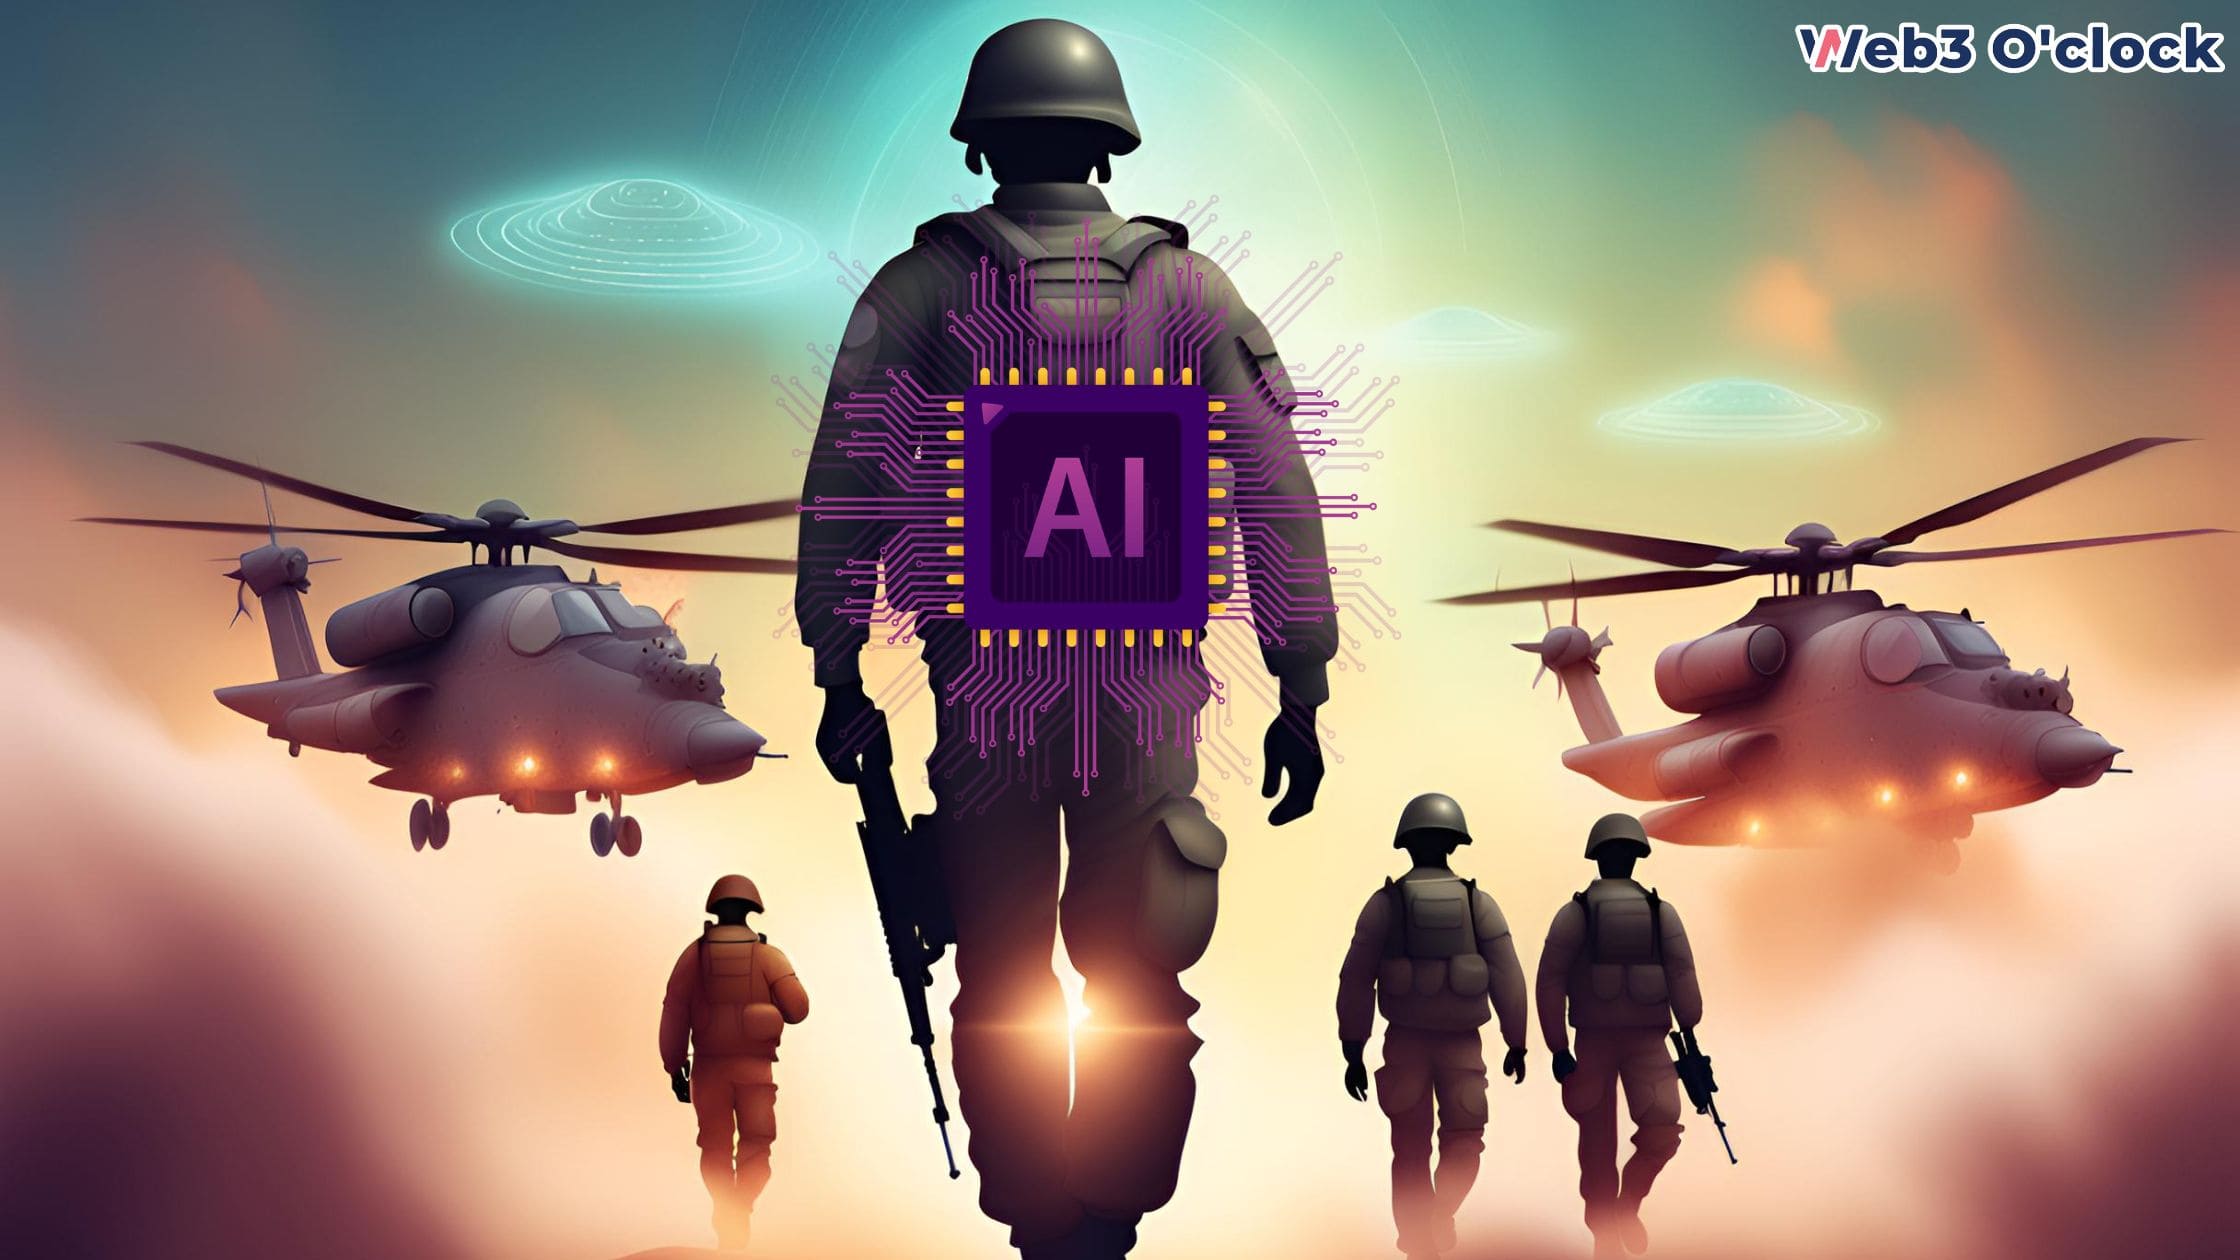 India's Military Ready for the AI Age by web3 o'clock